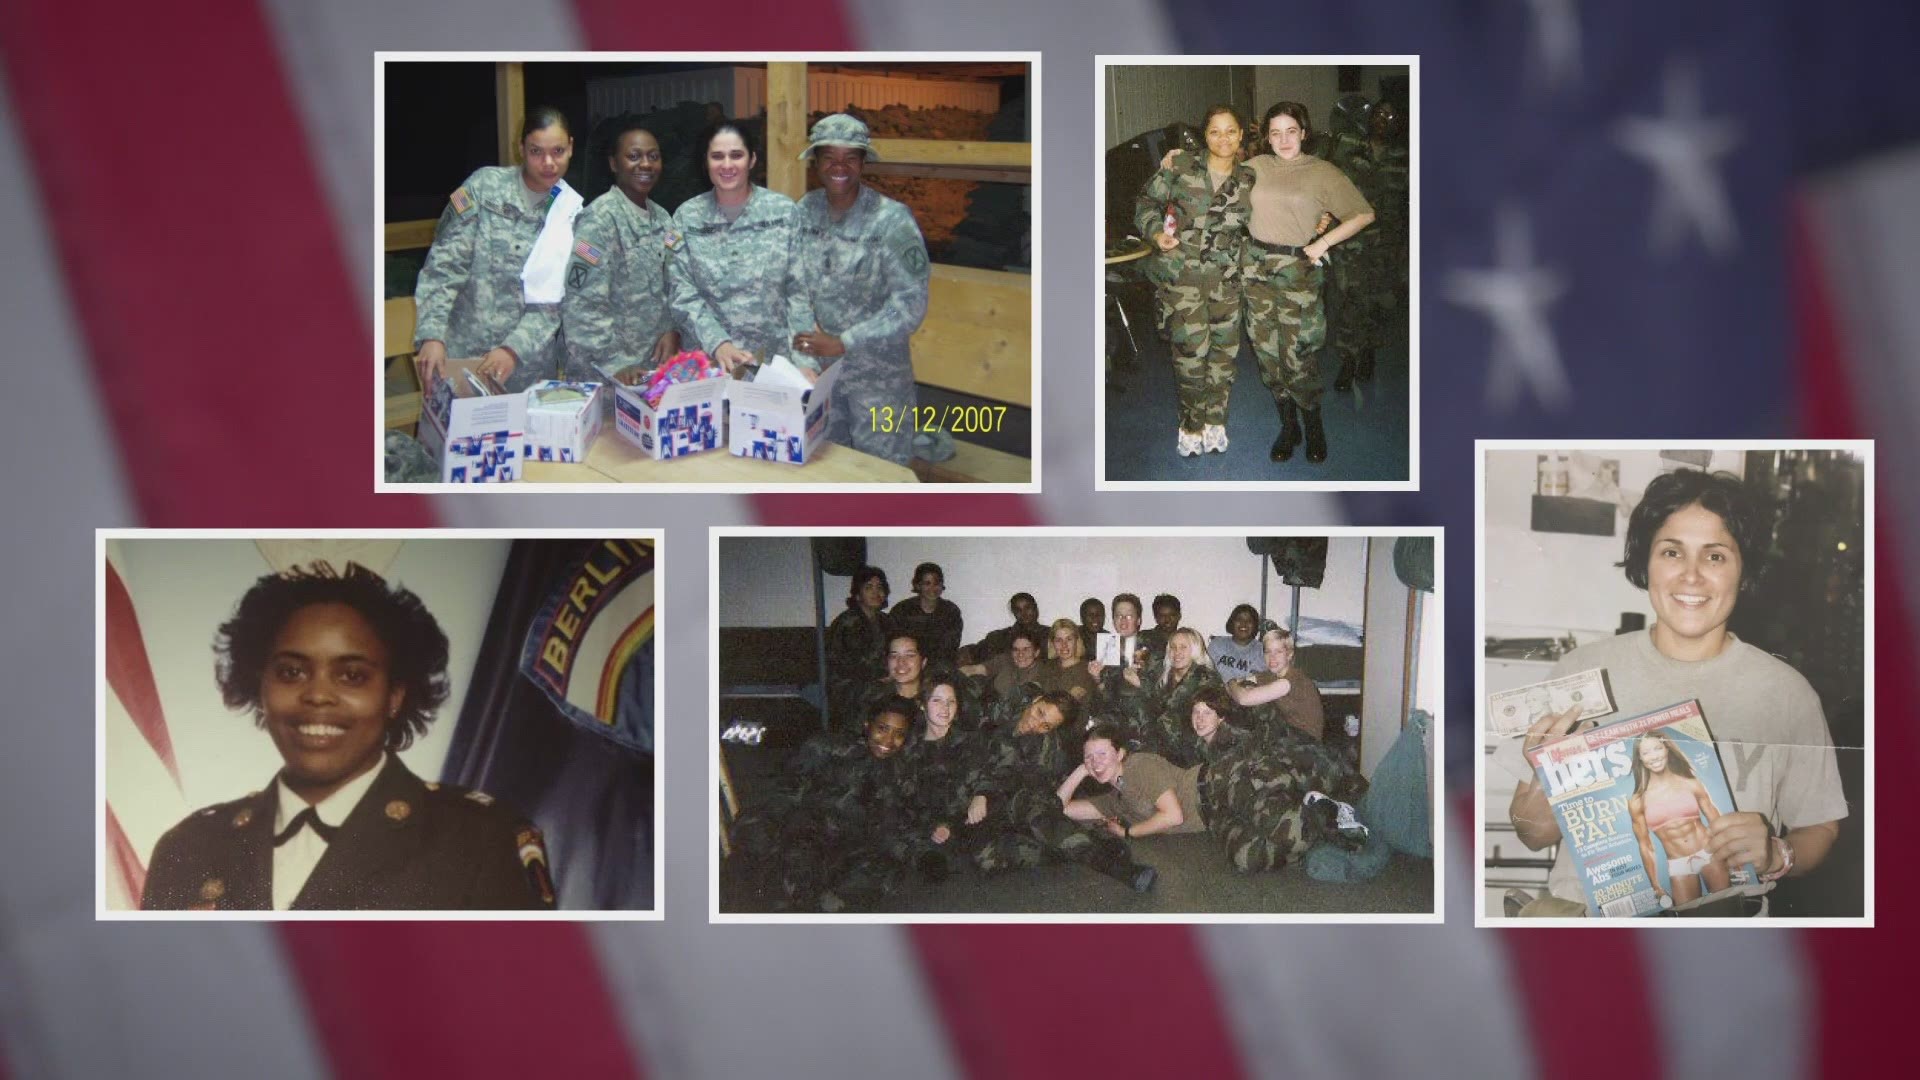 The leaders from WINC: For All Women Veterans are looking to help as many of their sisters as they can.